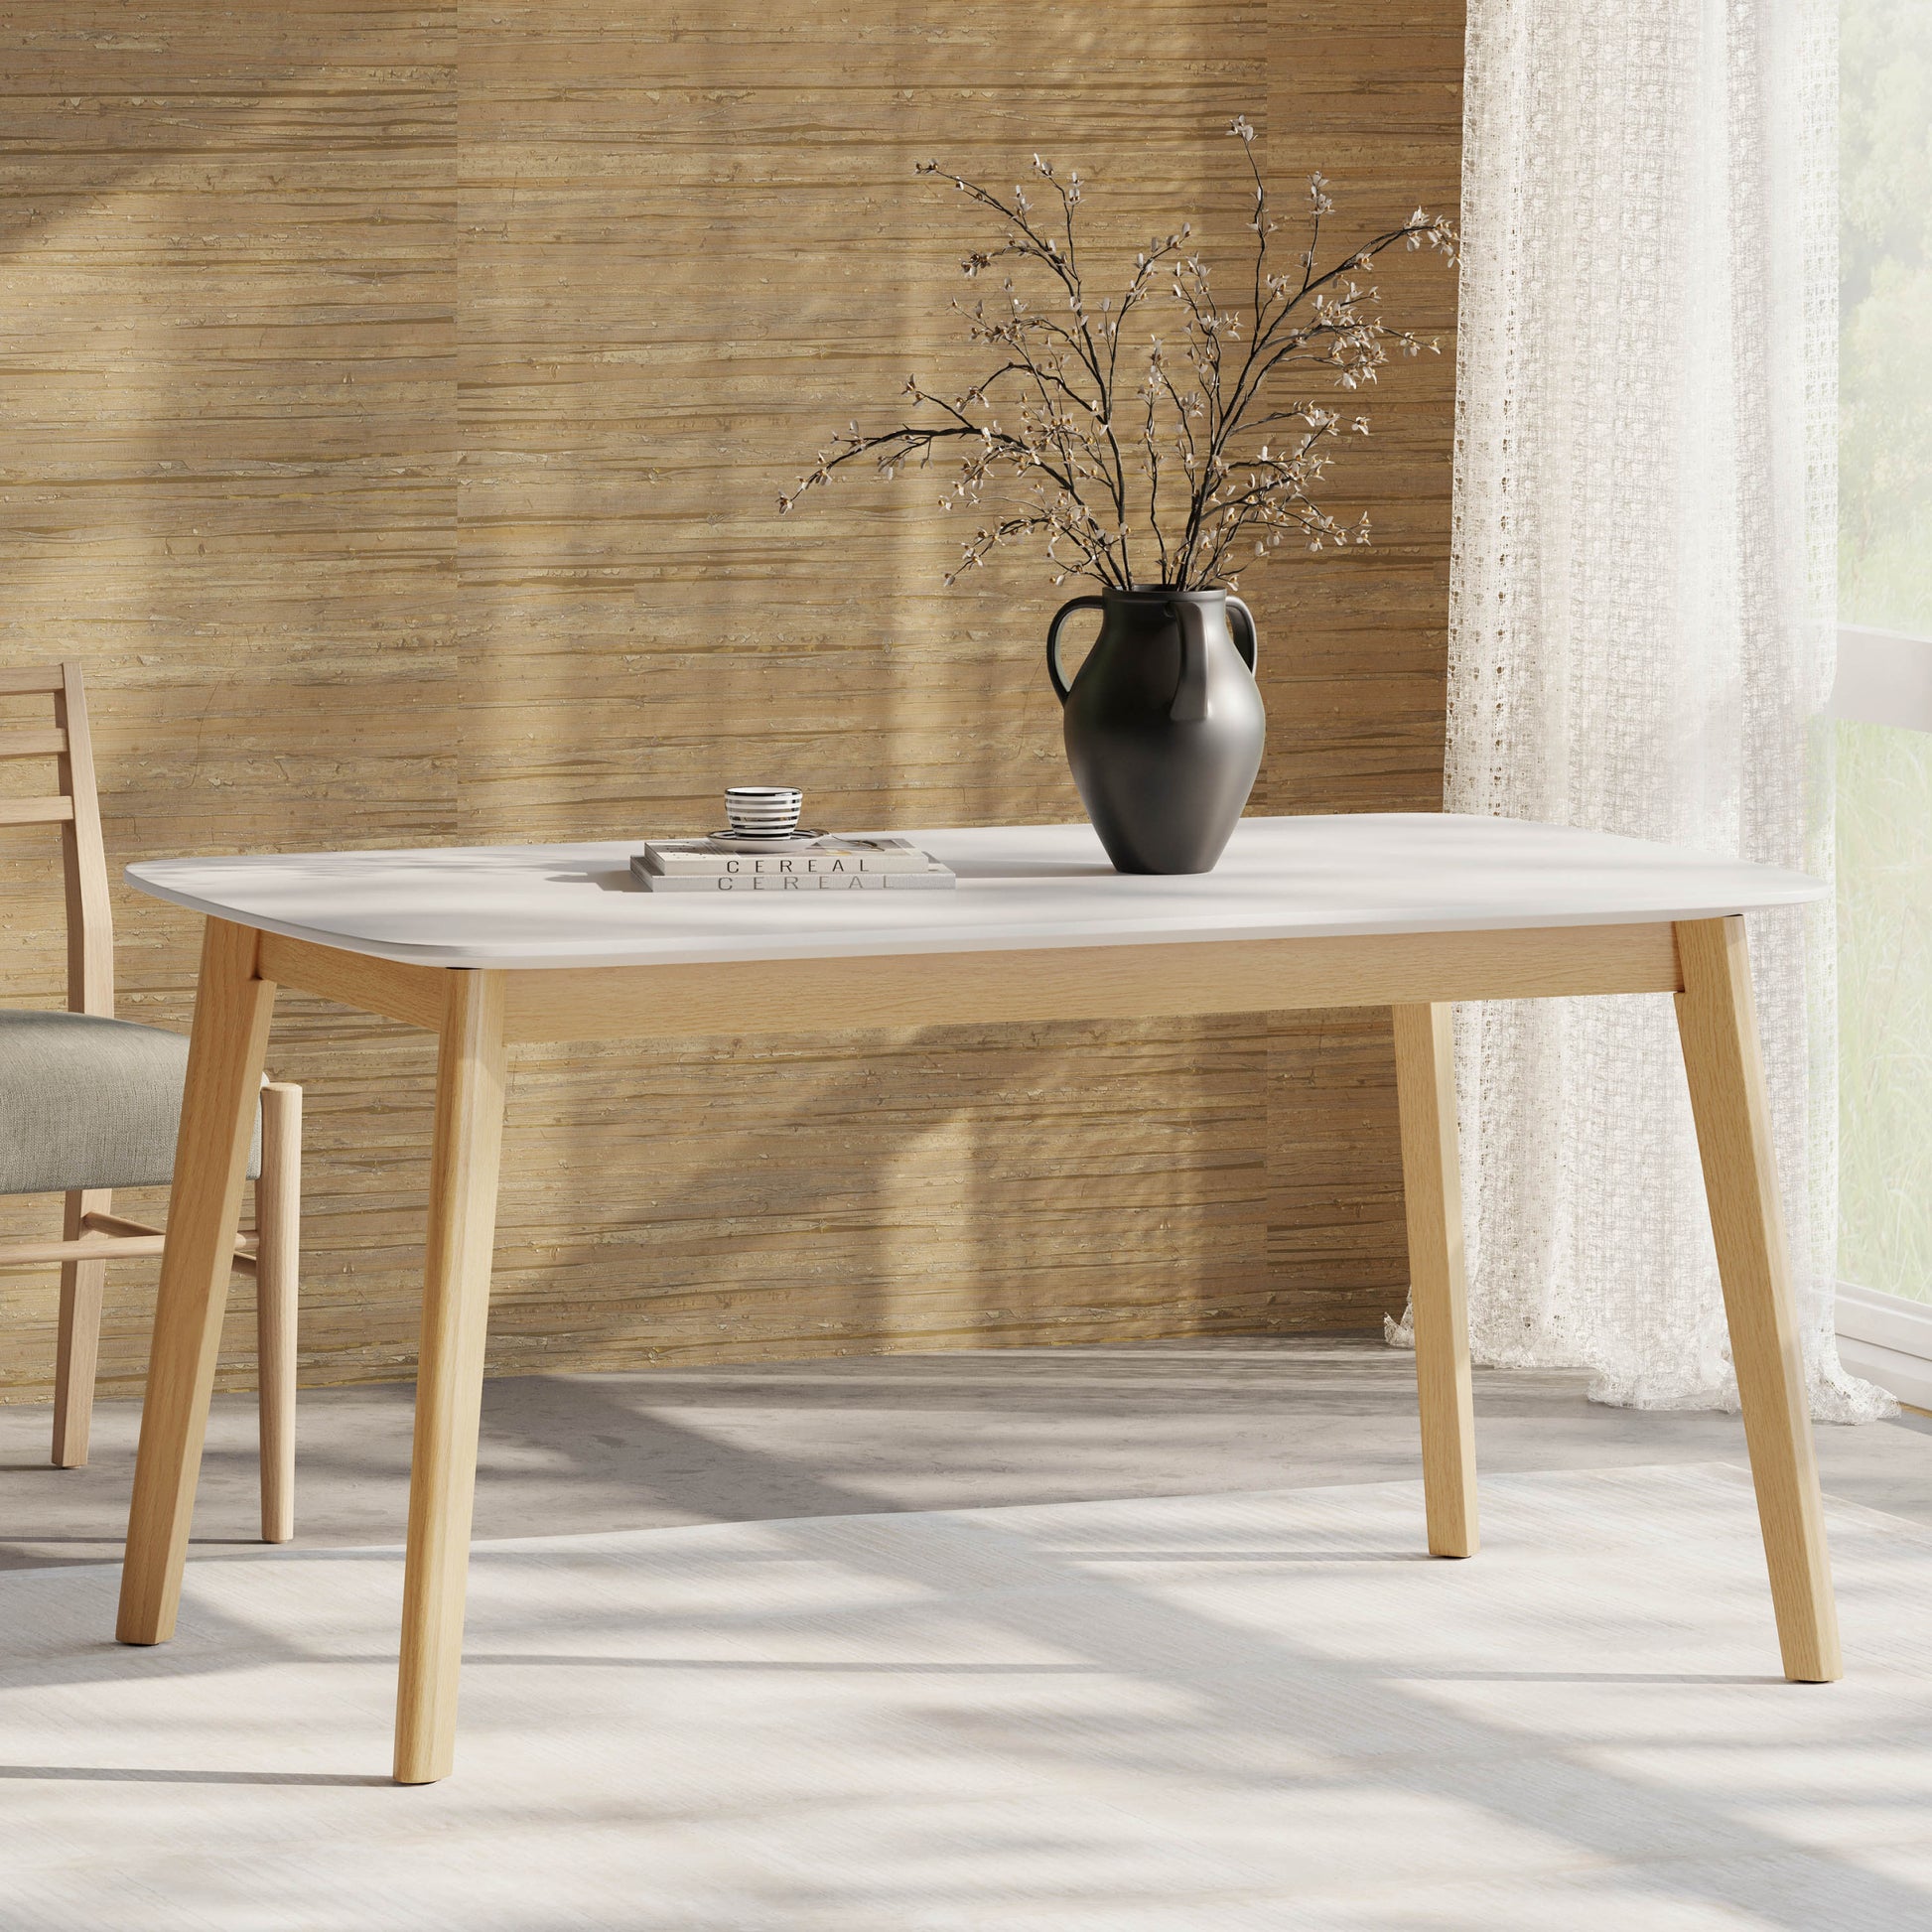 DINING TABLE white oak-mdf